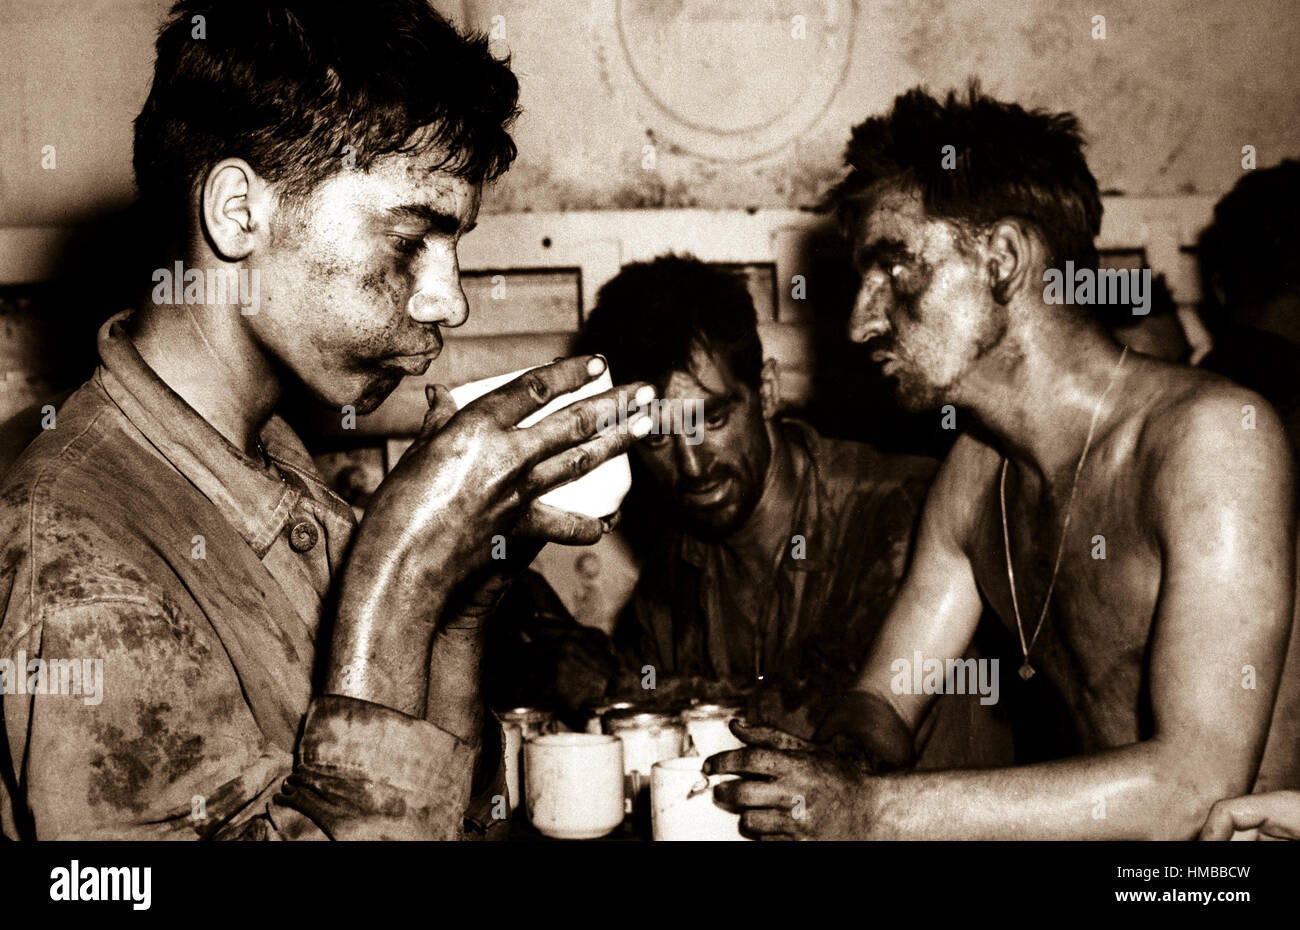 These Marines, begrimed and weary from two days and two nights of fighting, are typical of the conquerors of Eniwetok Atoll.  Pfc. Faris M. (Bob) Tuohy, 19, is the Marine holding the coffee cup.  Ca.  1944.  CPhoM. Ray R. Platnick.  (Coast Guard) Exact Date Shot Unknown NARA FILE #:  026-G-3345 WAR & CONFLICT BOOK #:  926 Stock Photo